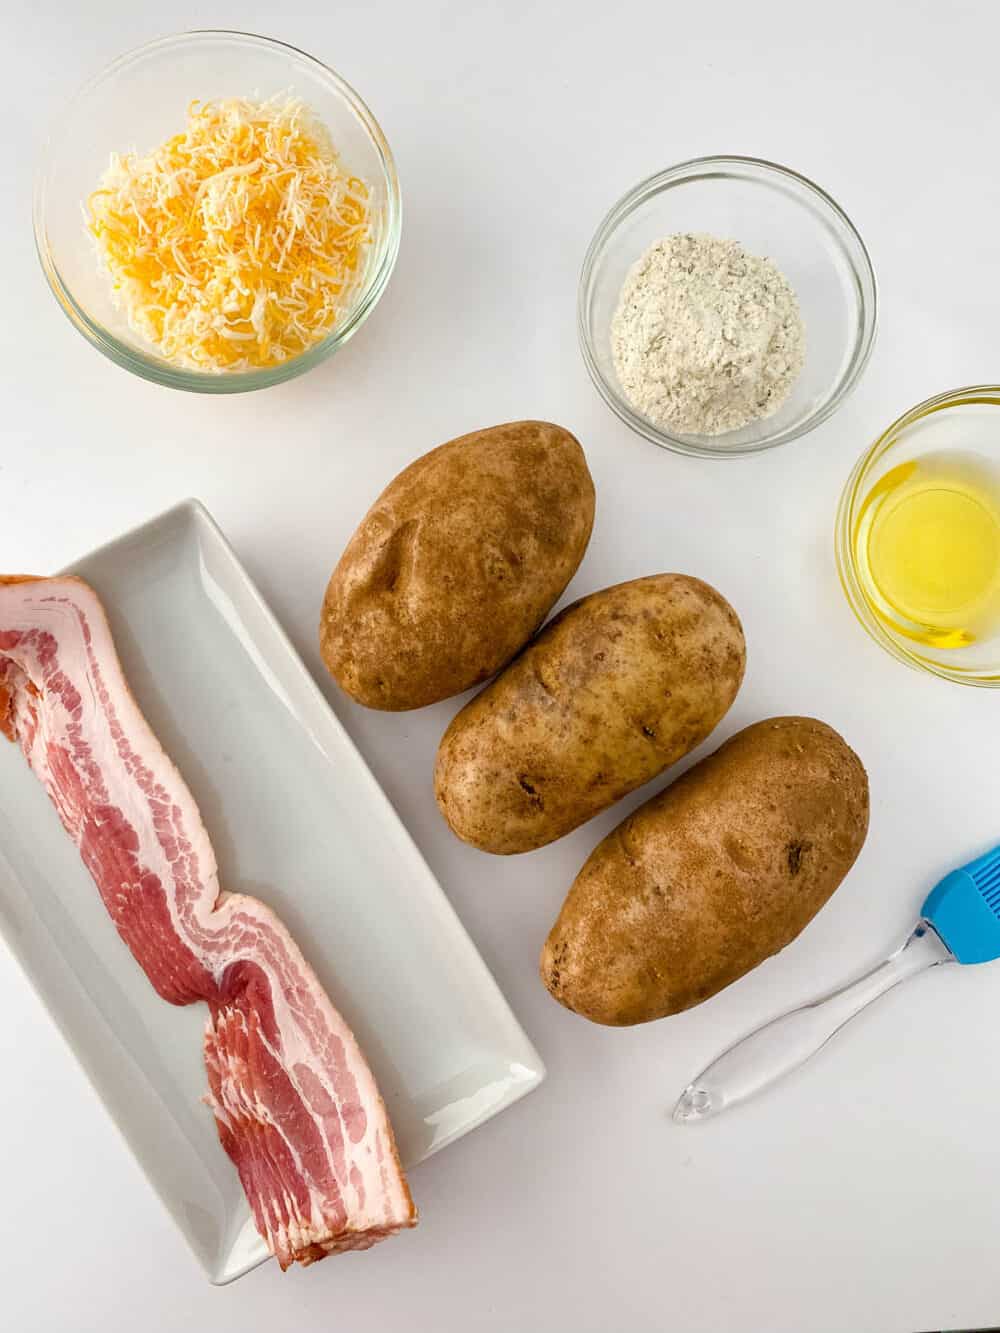 Ingredients for Potato Poppers laid out on a white surface